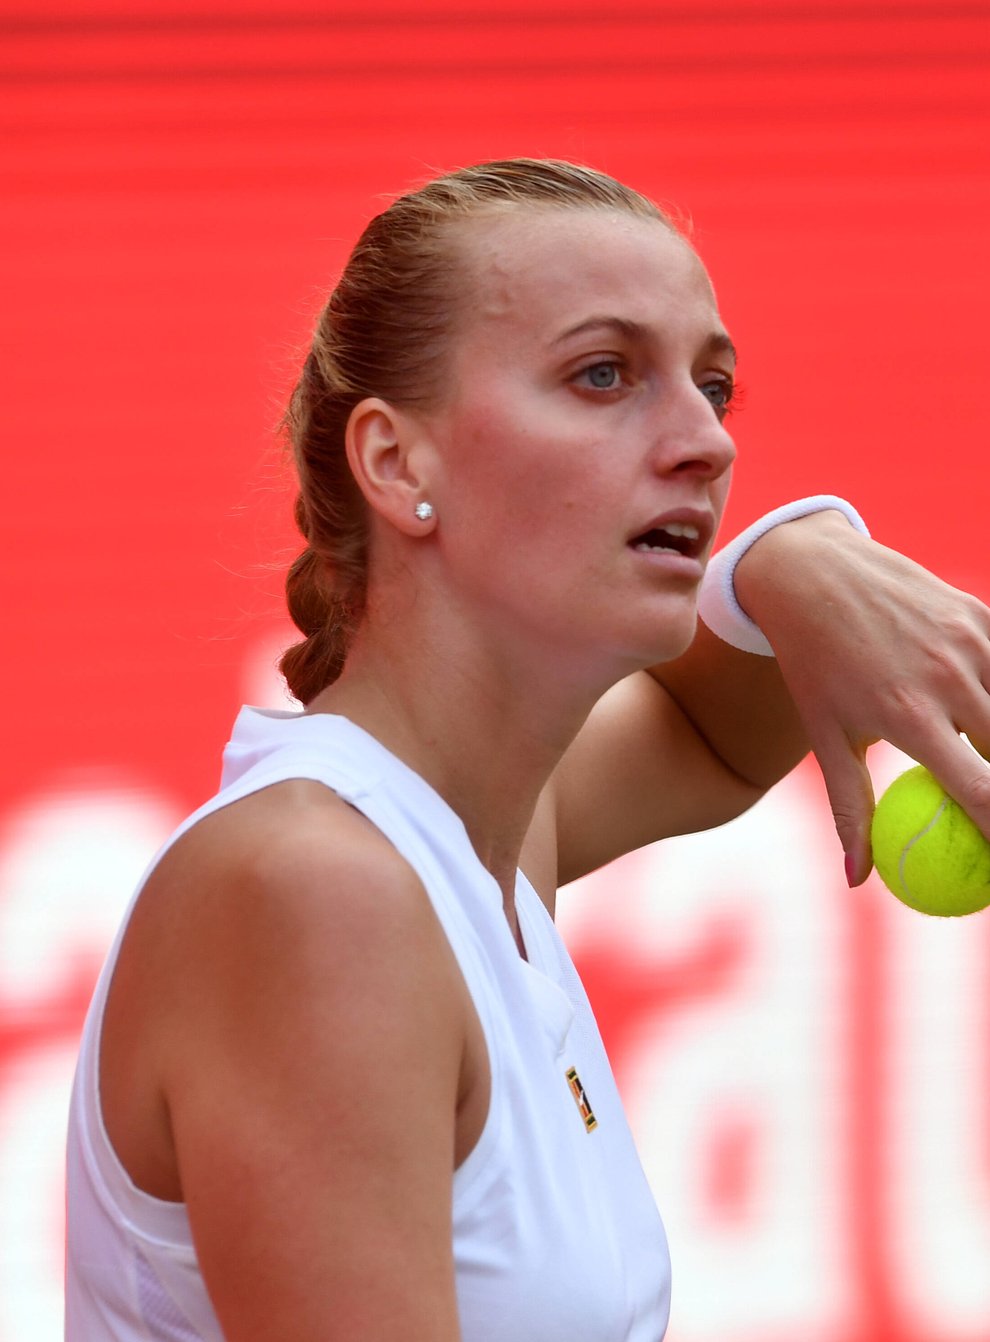 Kvitova has said not all players will attend the US Open